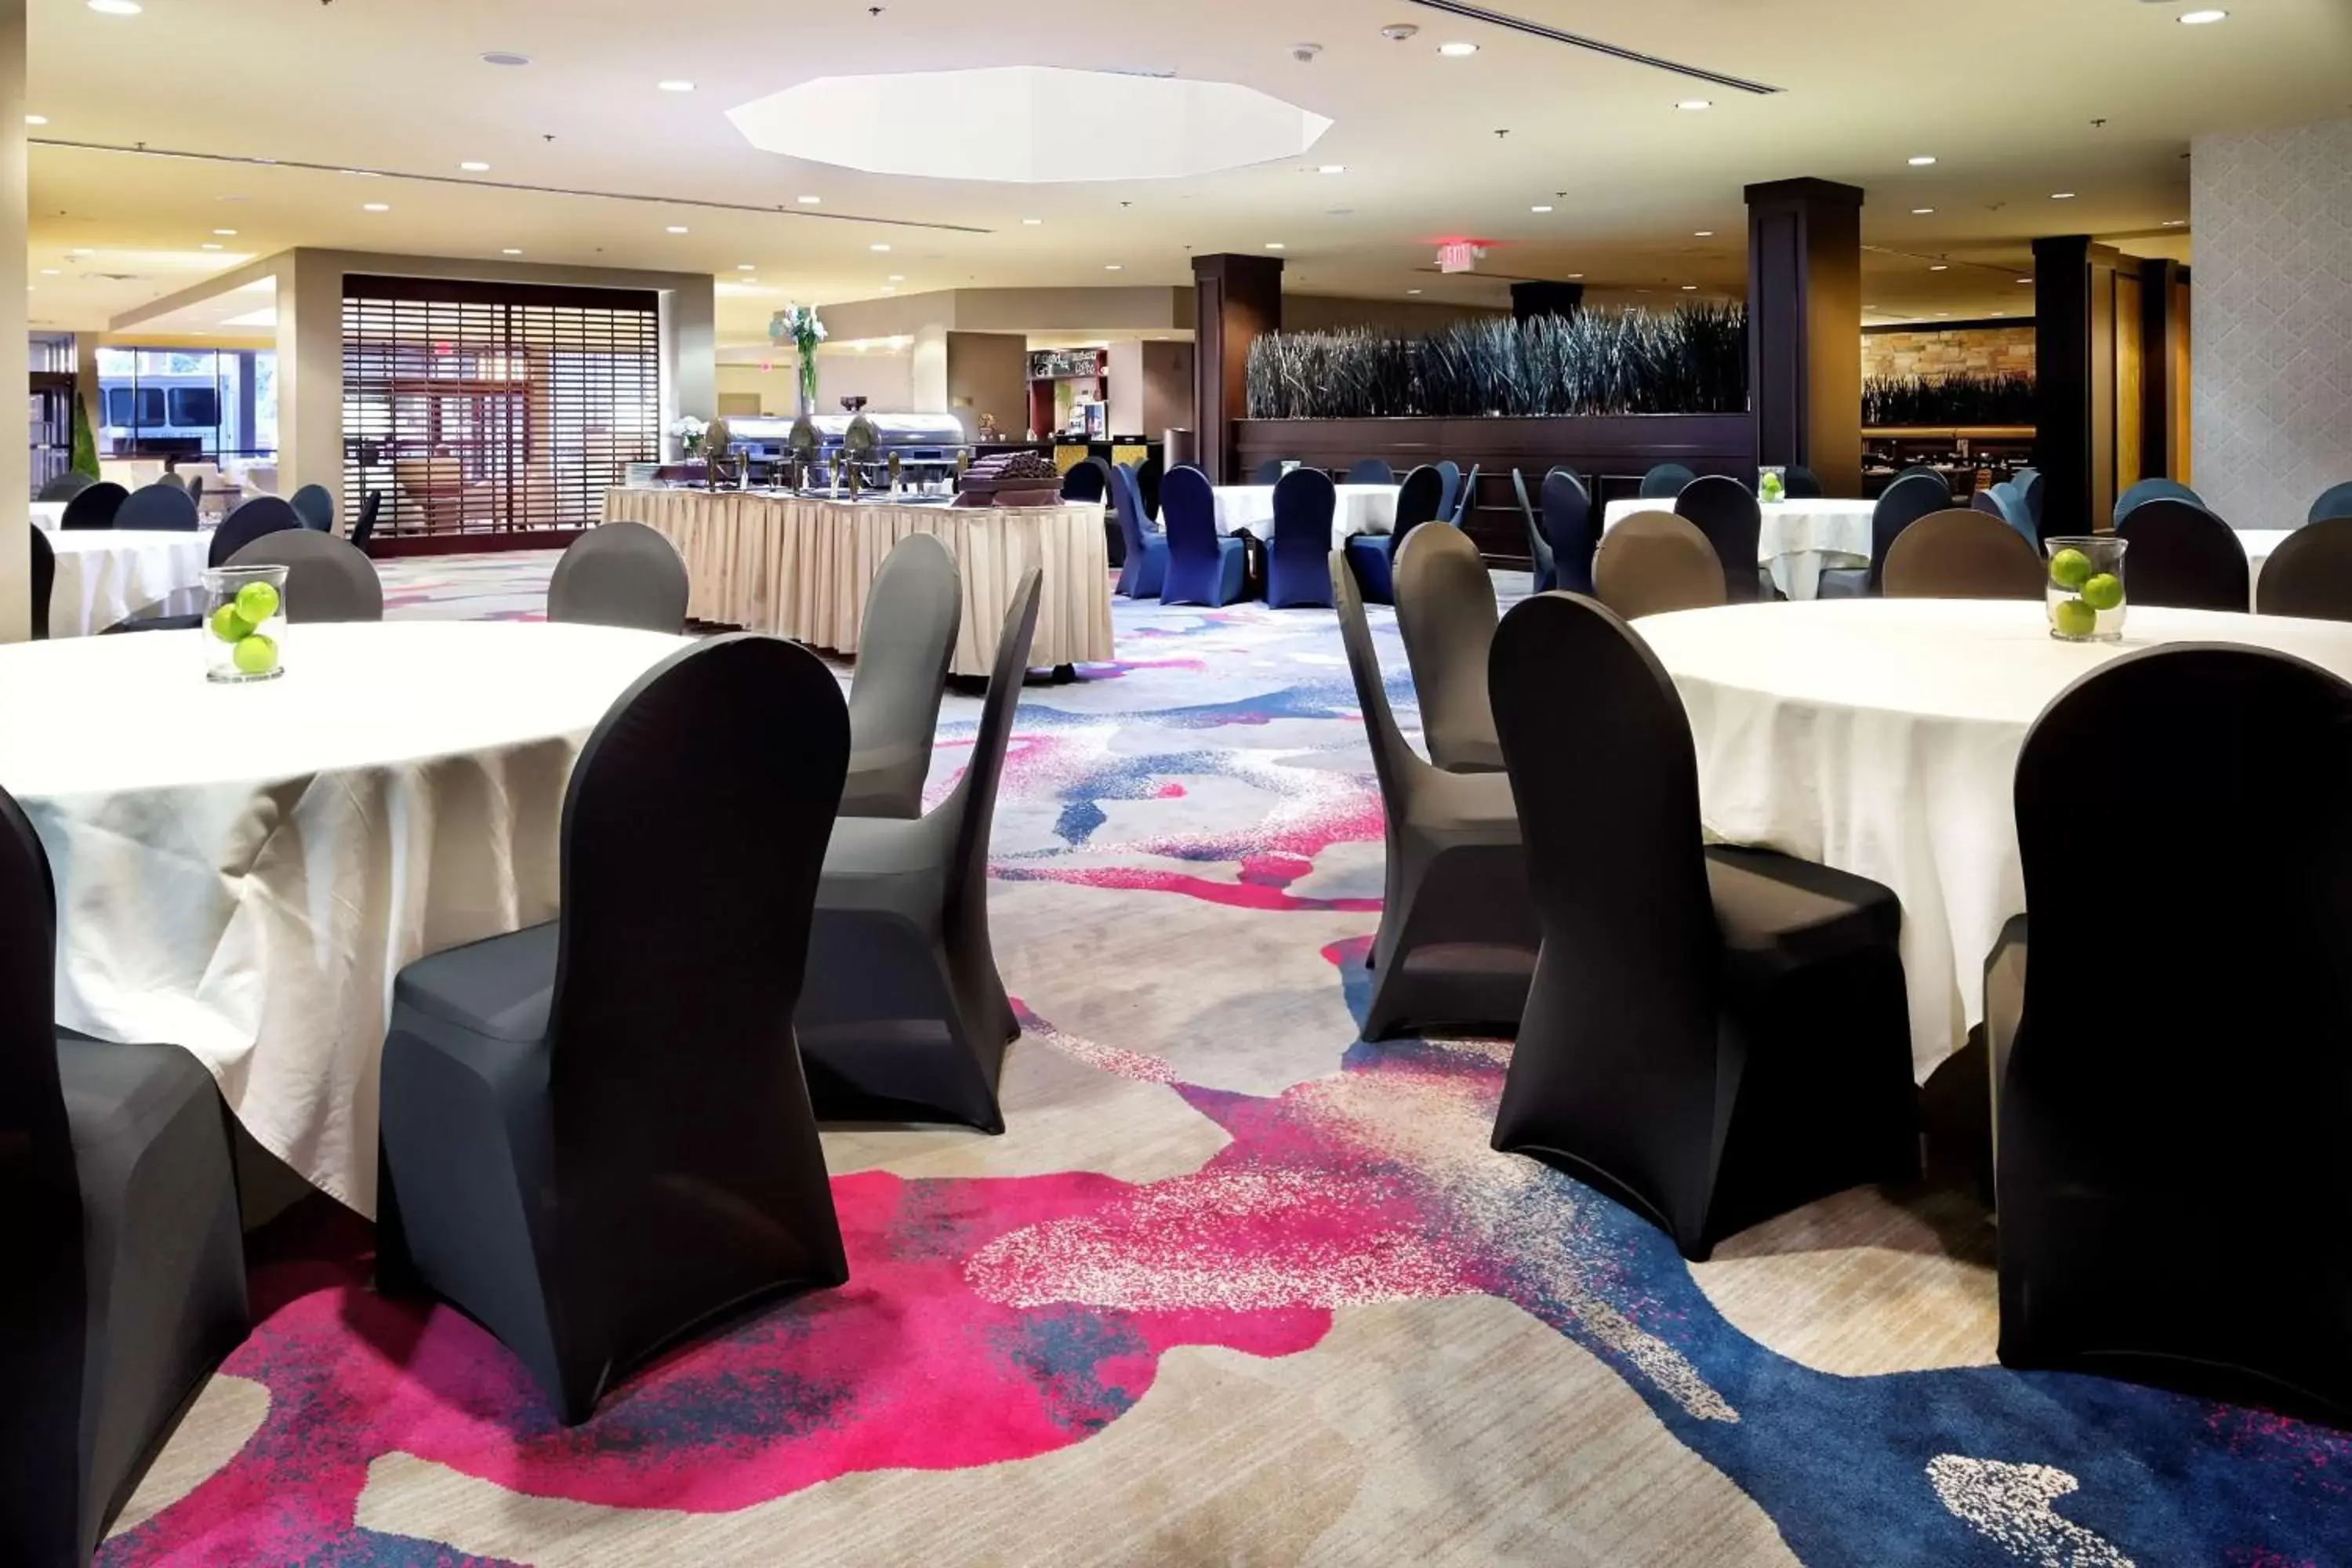 Meeting/conference room, Banquet Facilities in DoubleTree by Hilton DFW Airport North